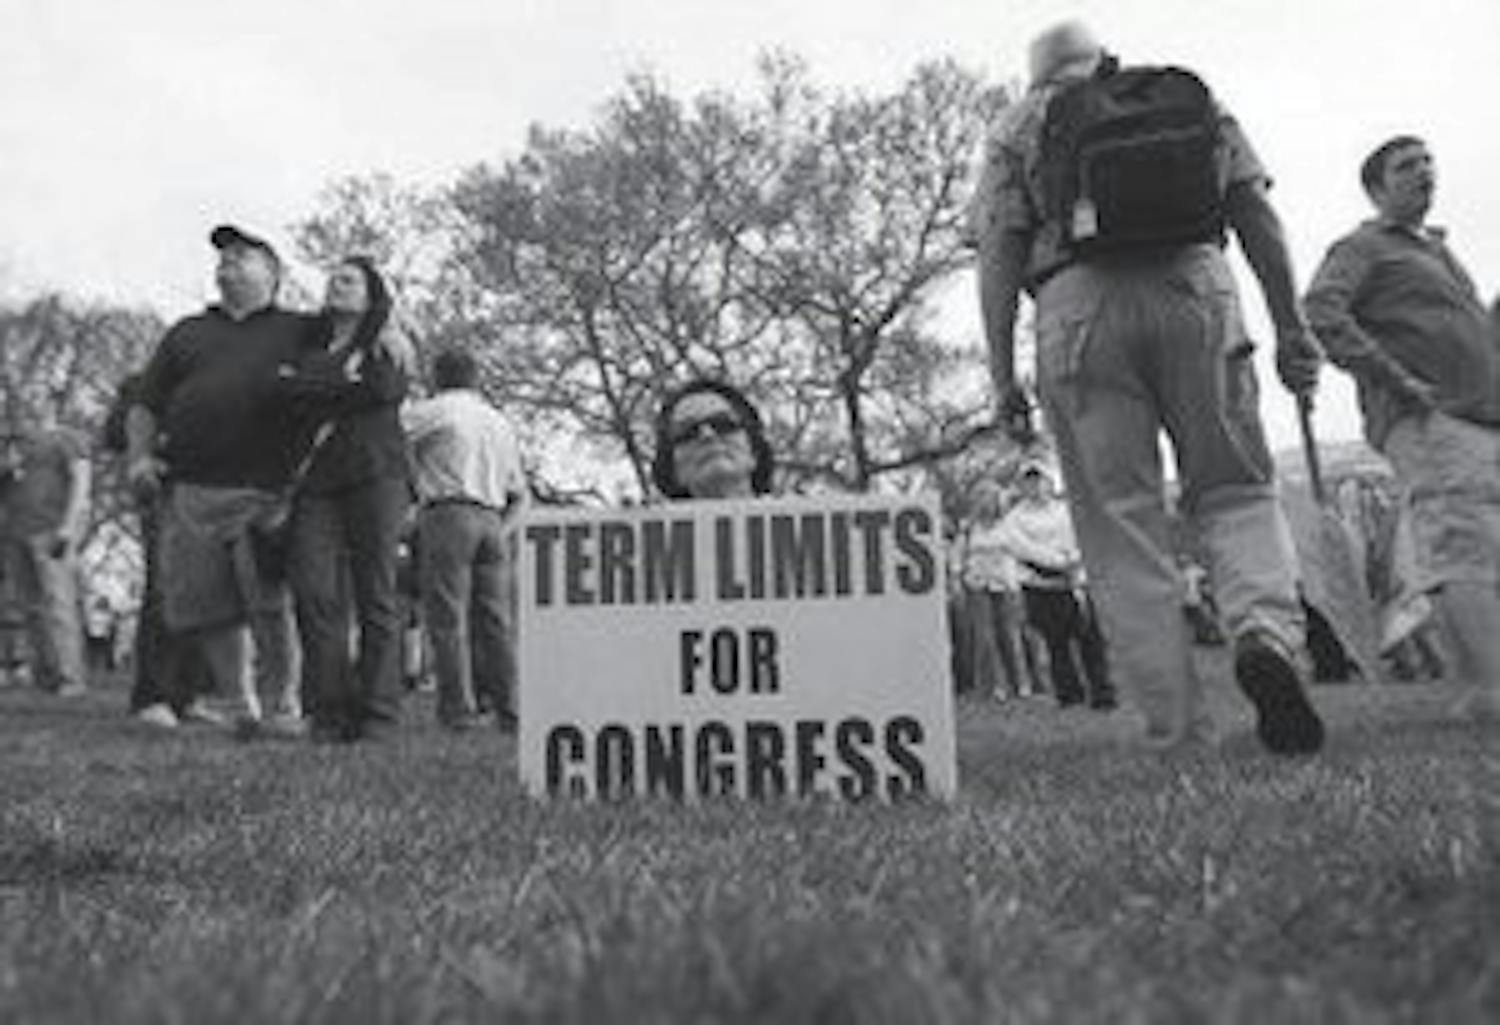 A protest in support of term limits for Congress took place outside the U.S. Capitol in March 2012. (Courtesy of Mark Wilson / Getty Images)